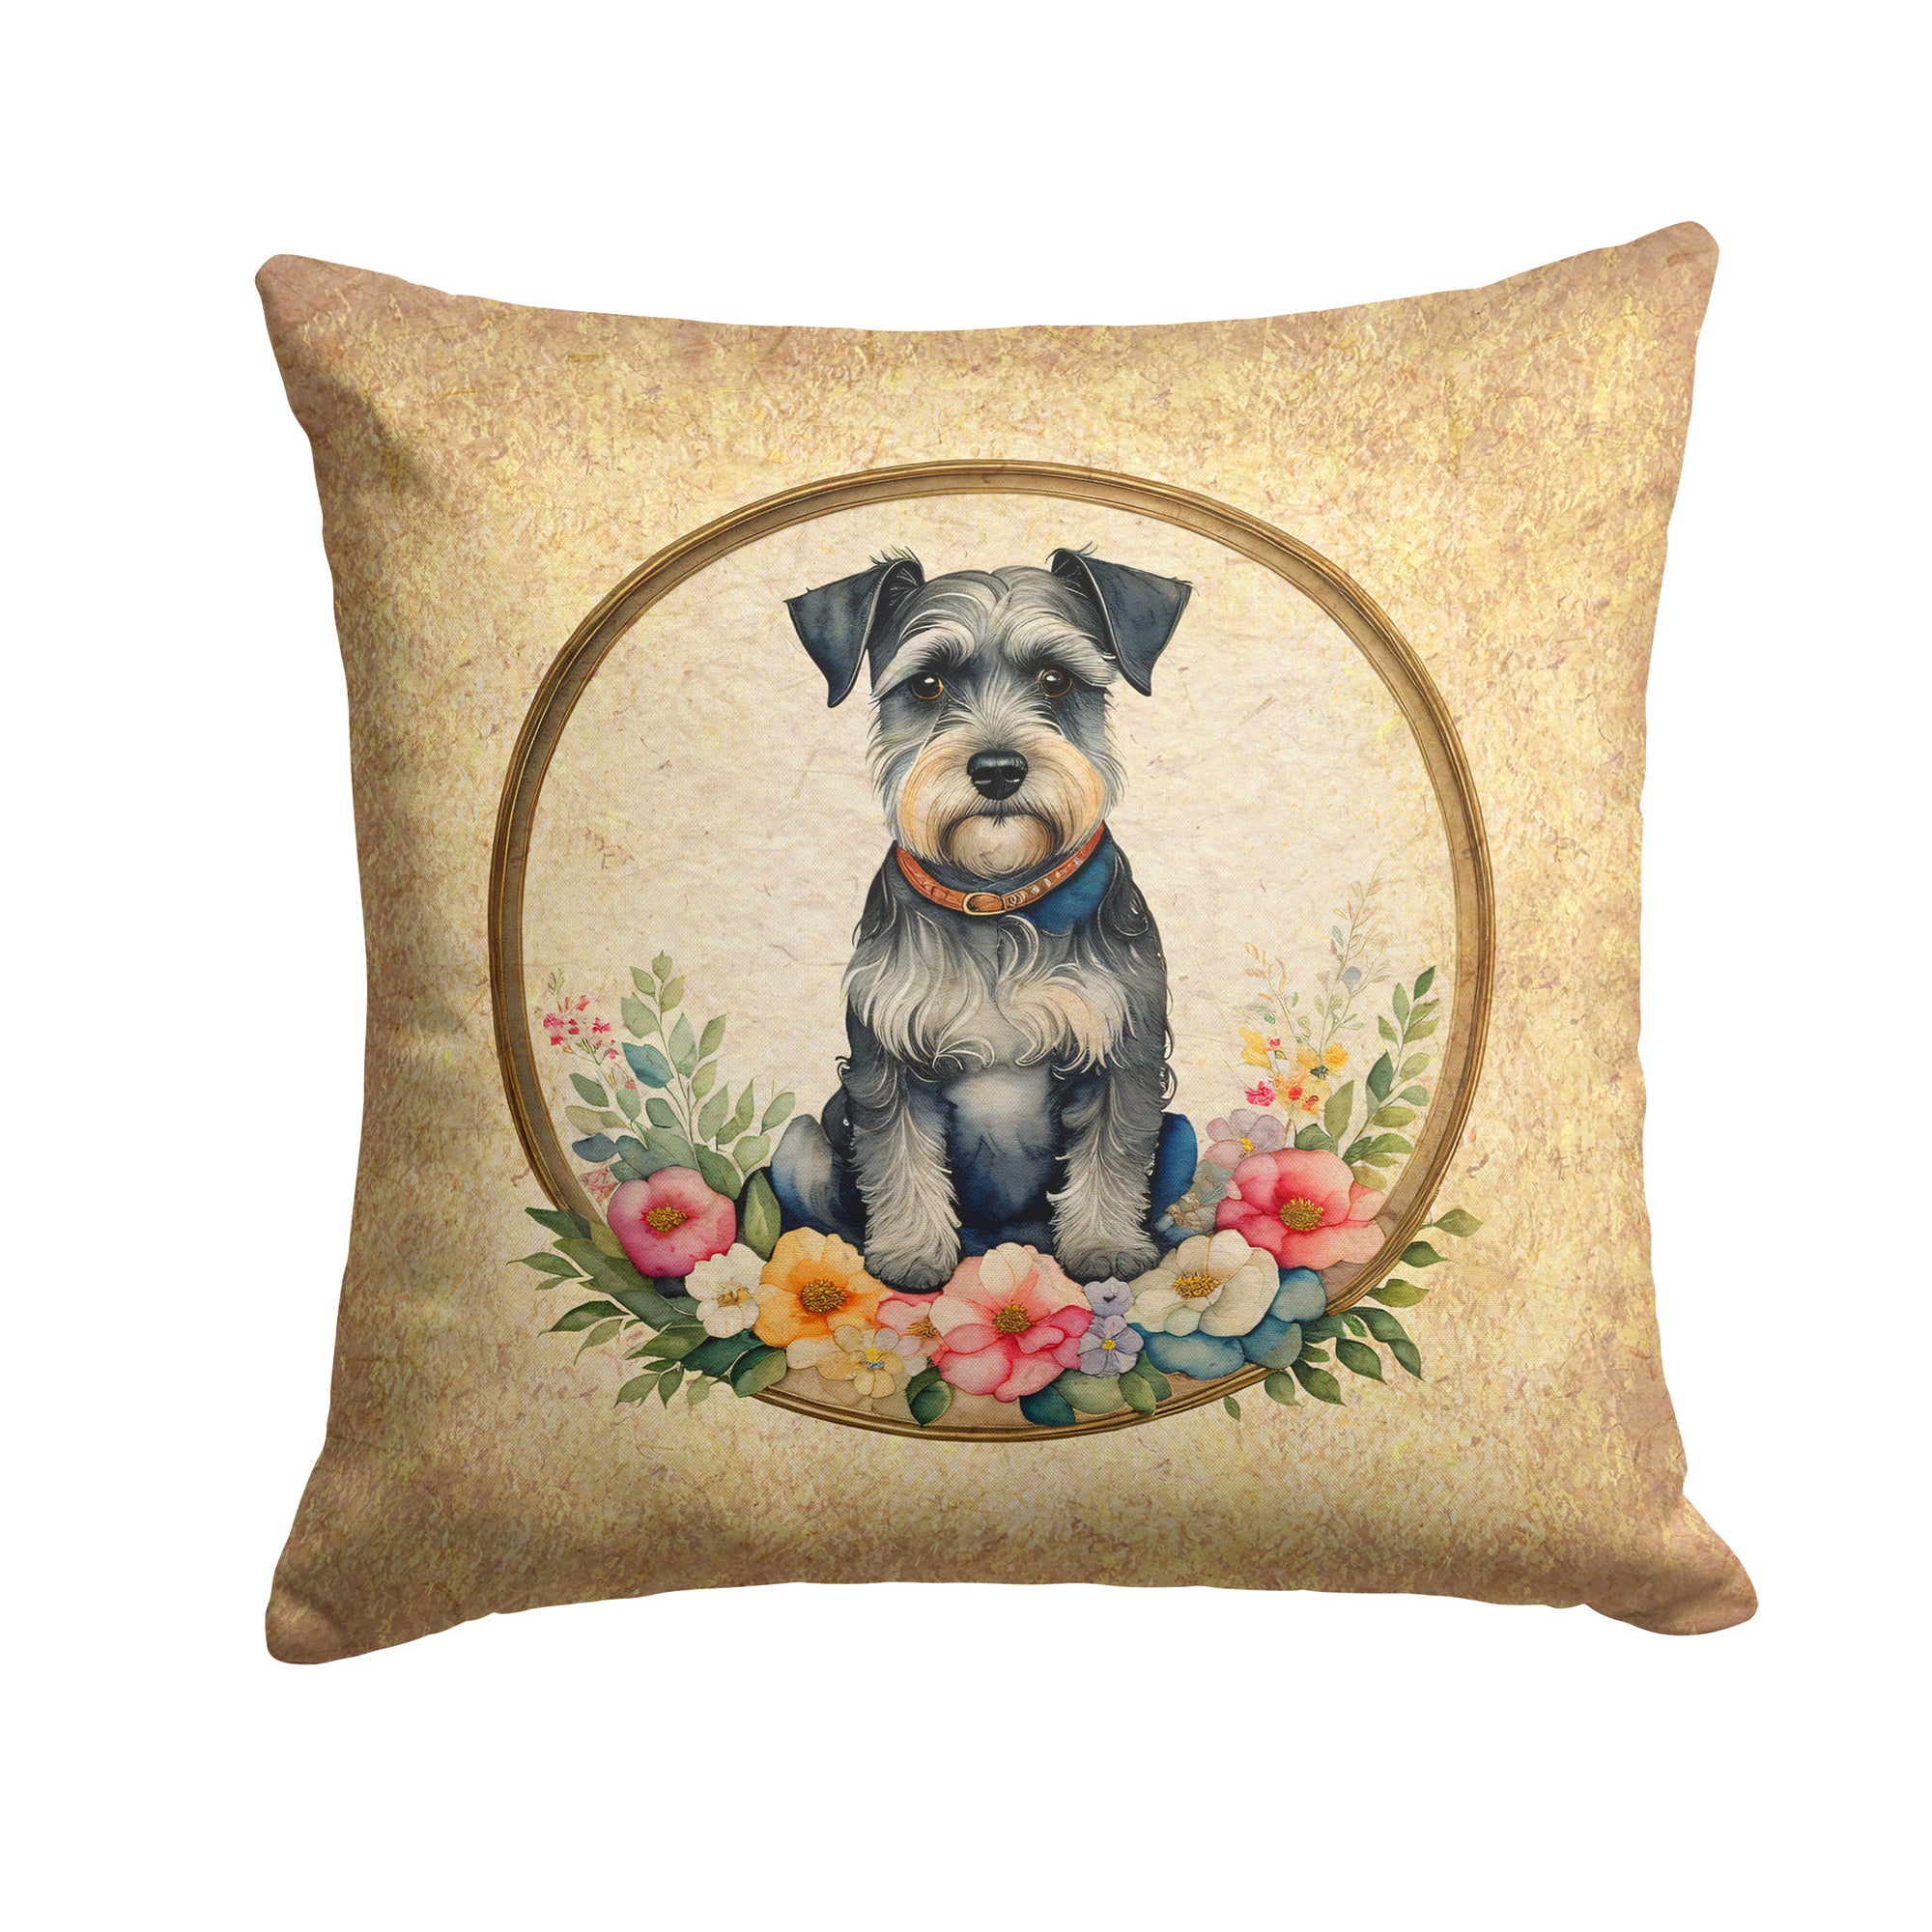 Buy this Schnauzer and Flowers Fabric Decorative Pillow